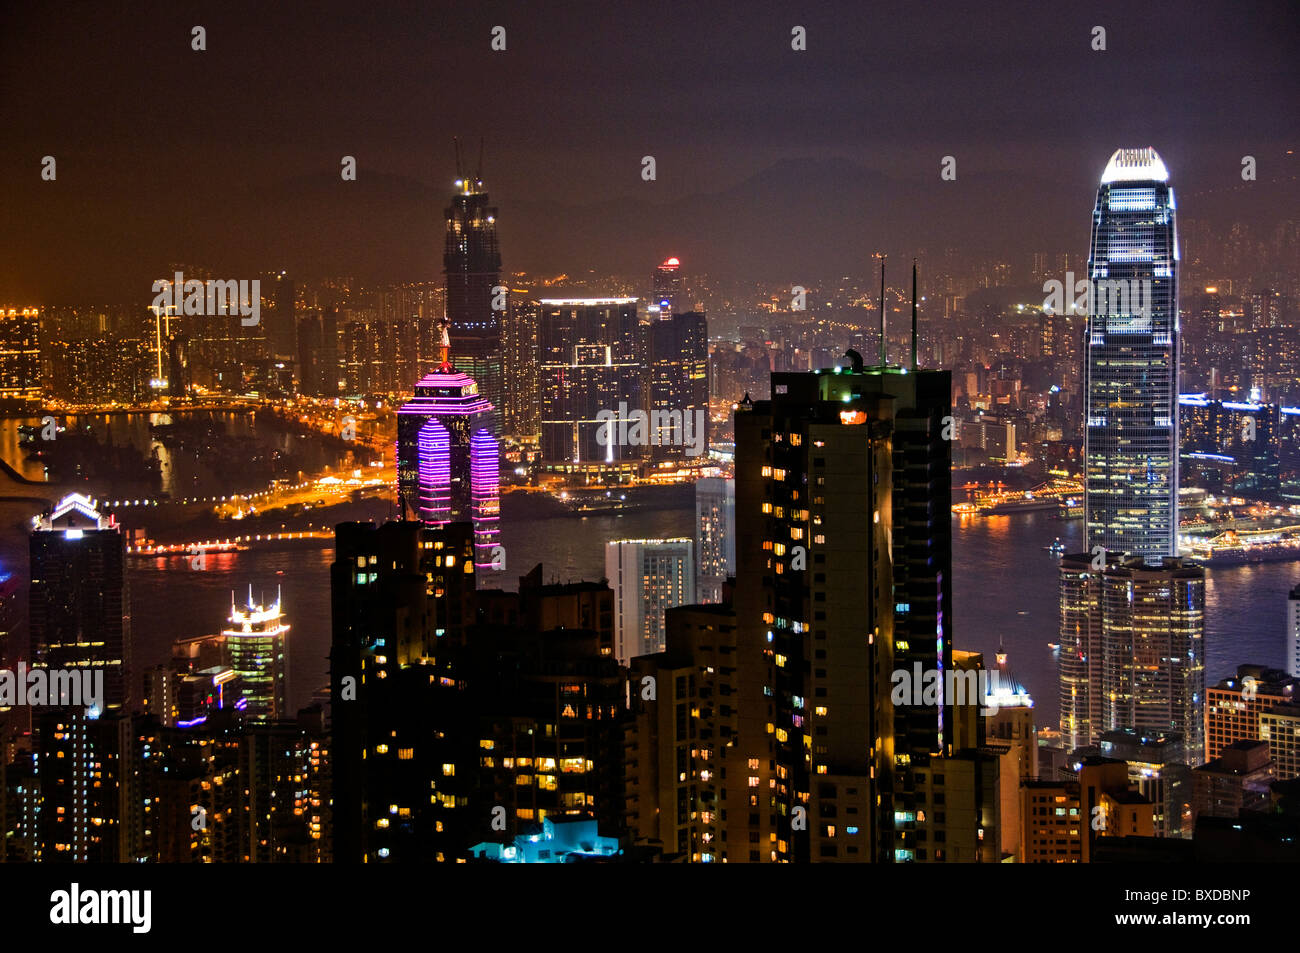 City skyline of downtown Hong Kong China at night from Victoria Peak Stock Photo